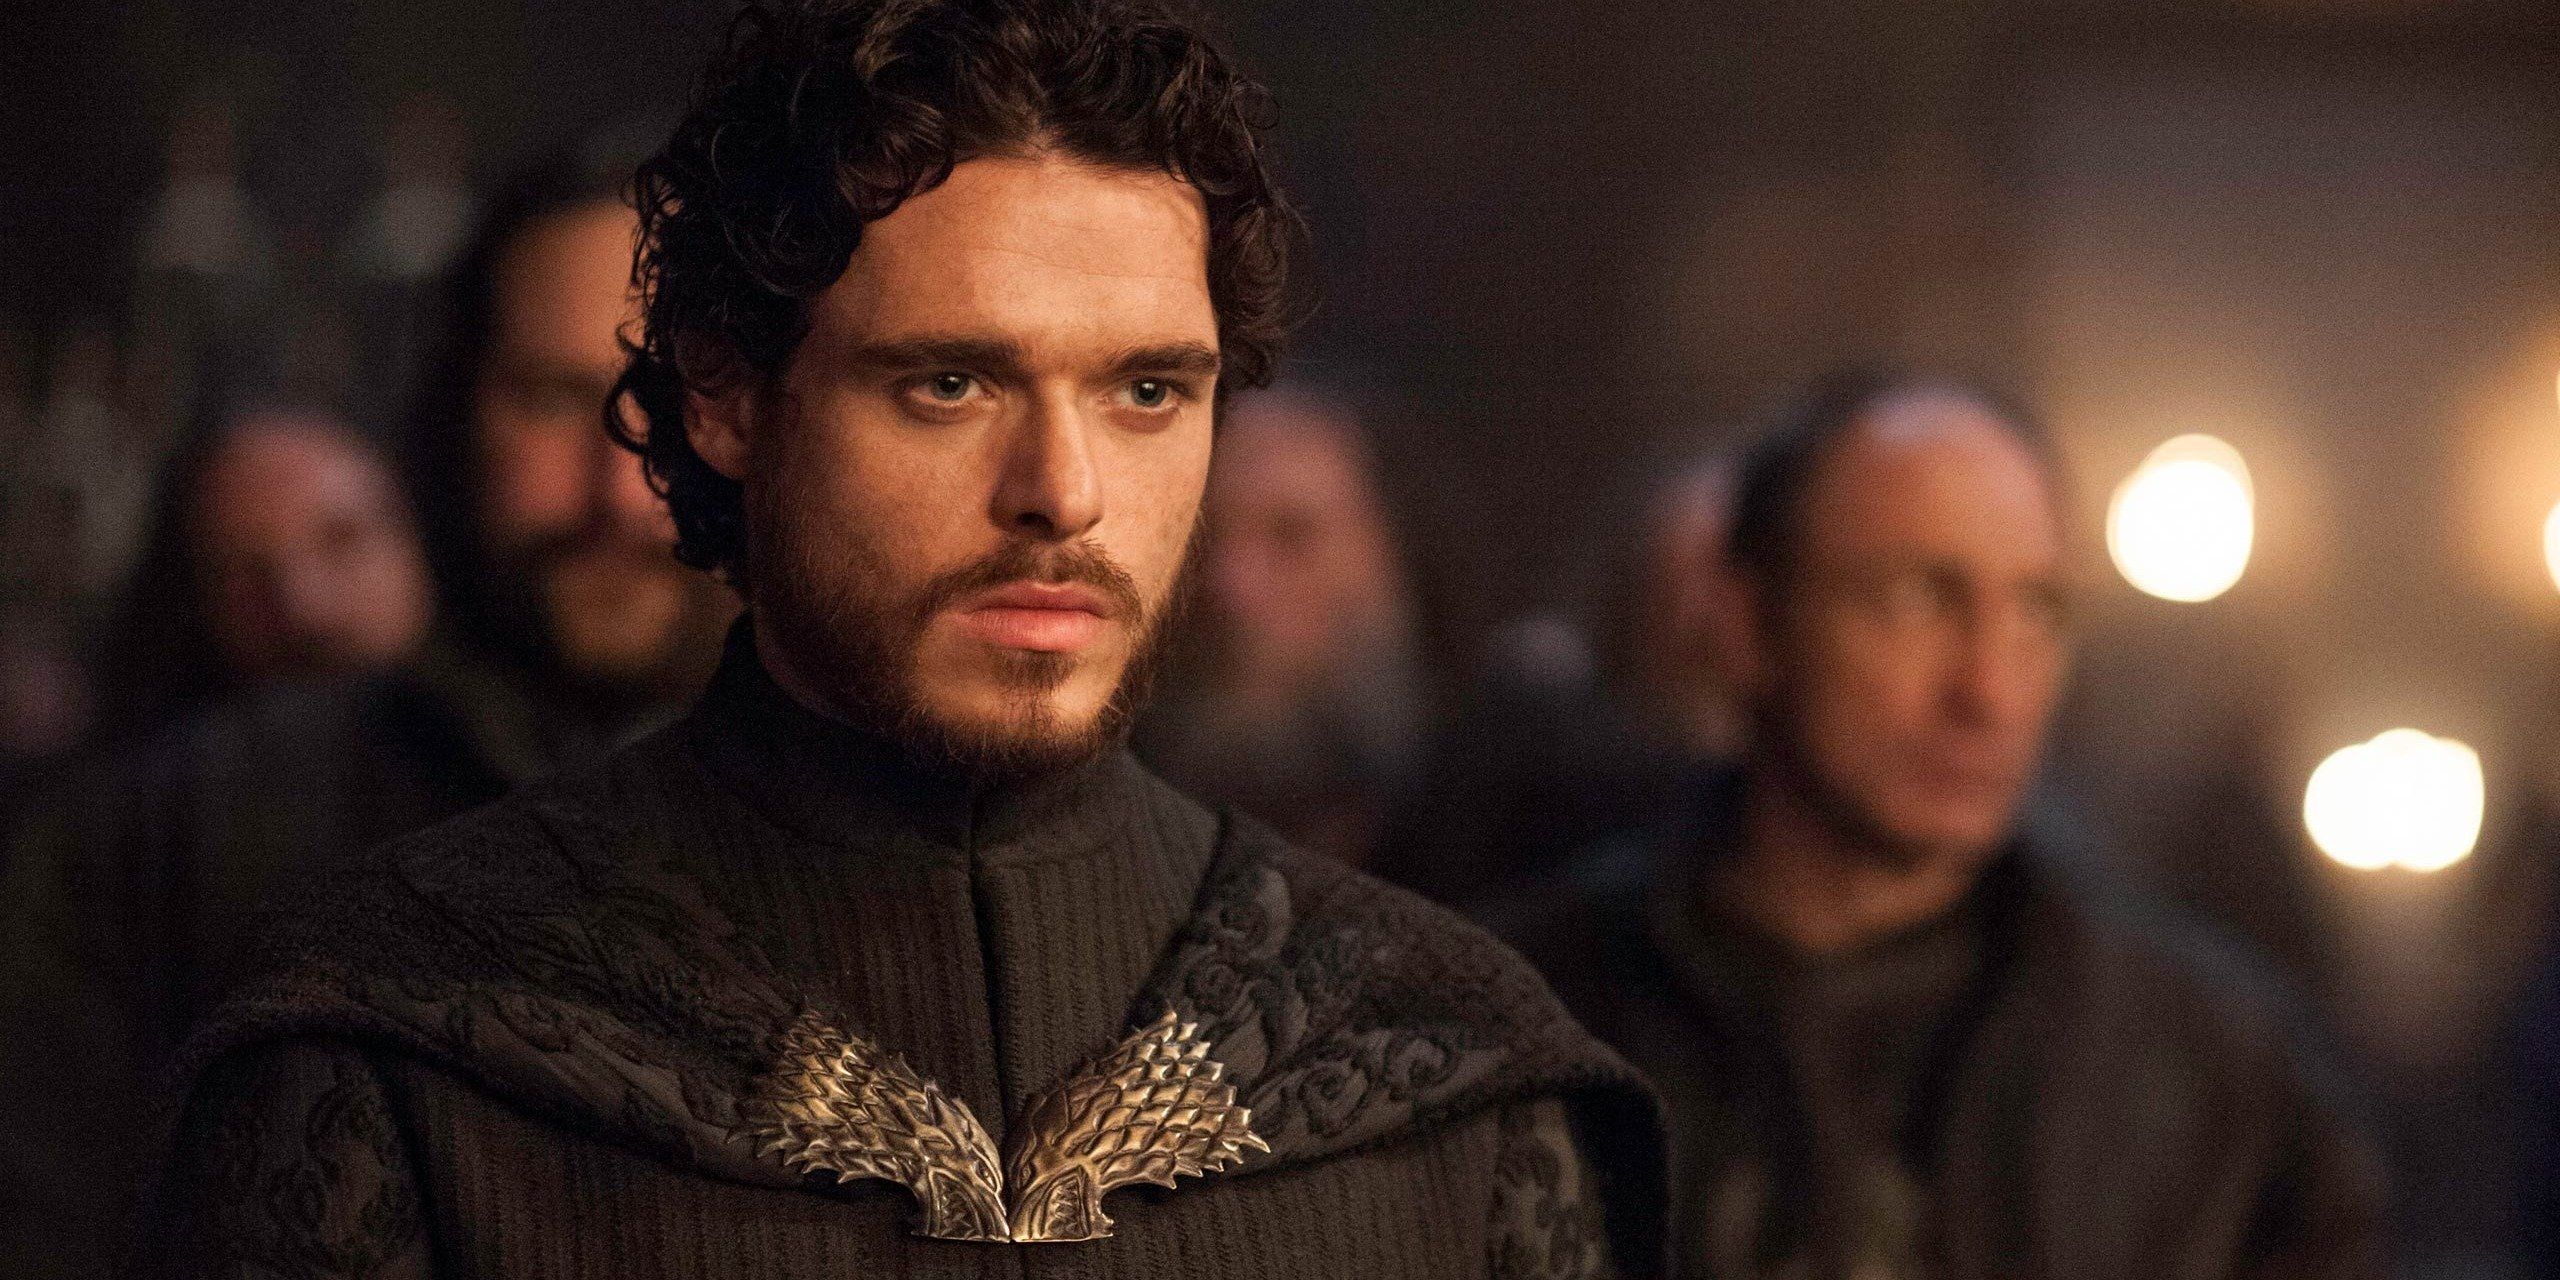 Aja Sæbe mikroskopisk How The Red Wedding Led To The Downfall Of Game Of Thrones